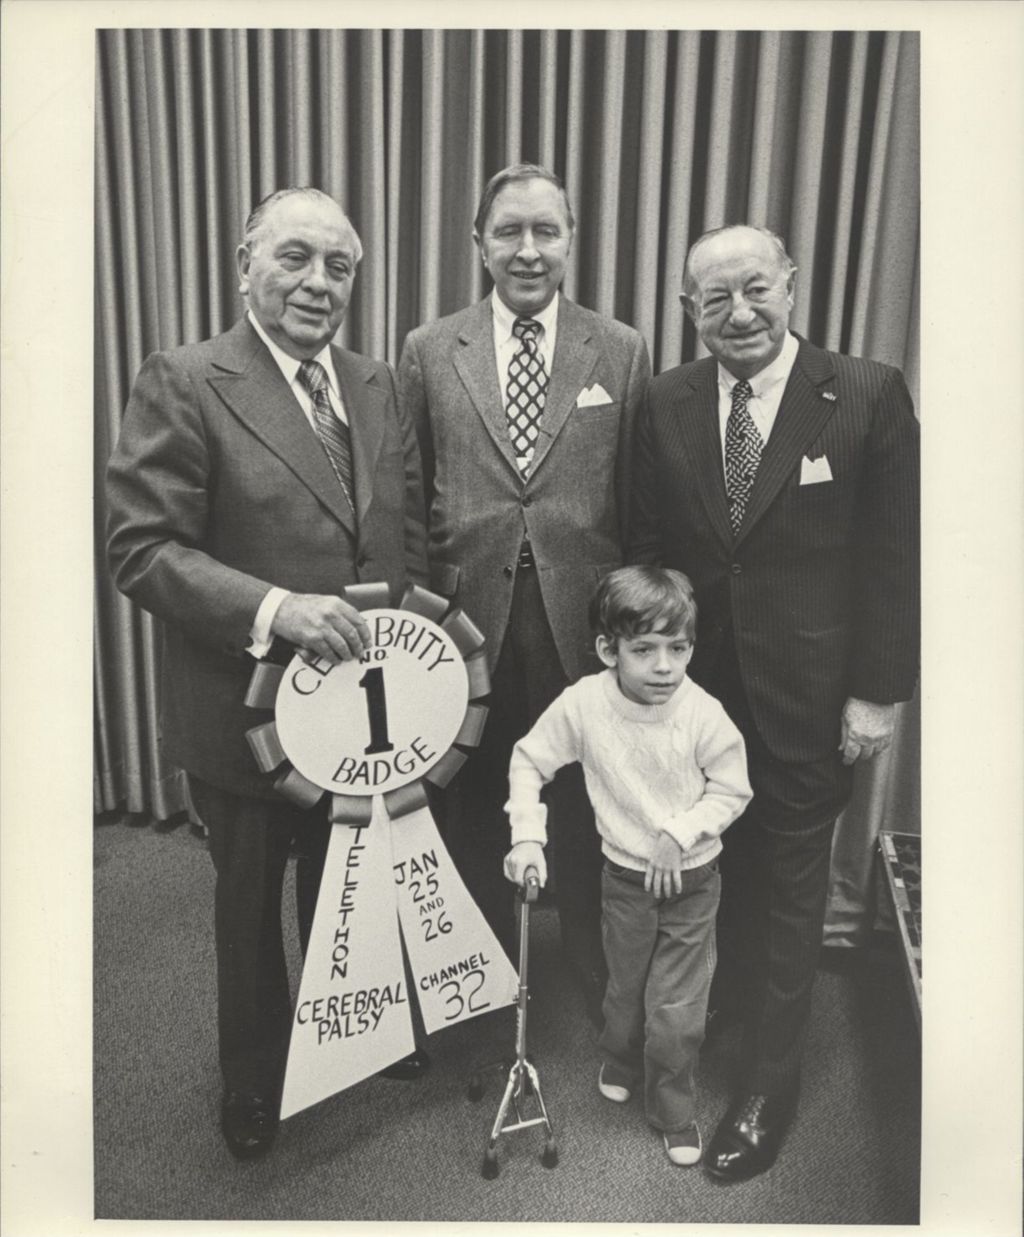 Miniature of Richard J. Daley with three others at Cerebral Palsy telethon event